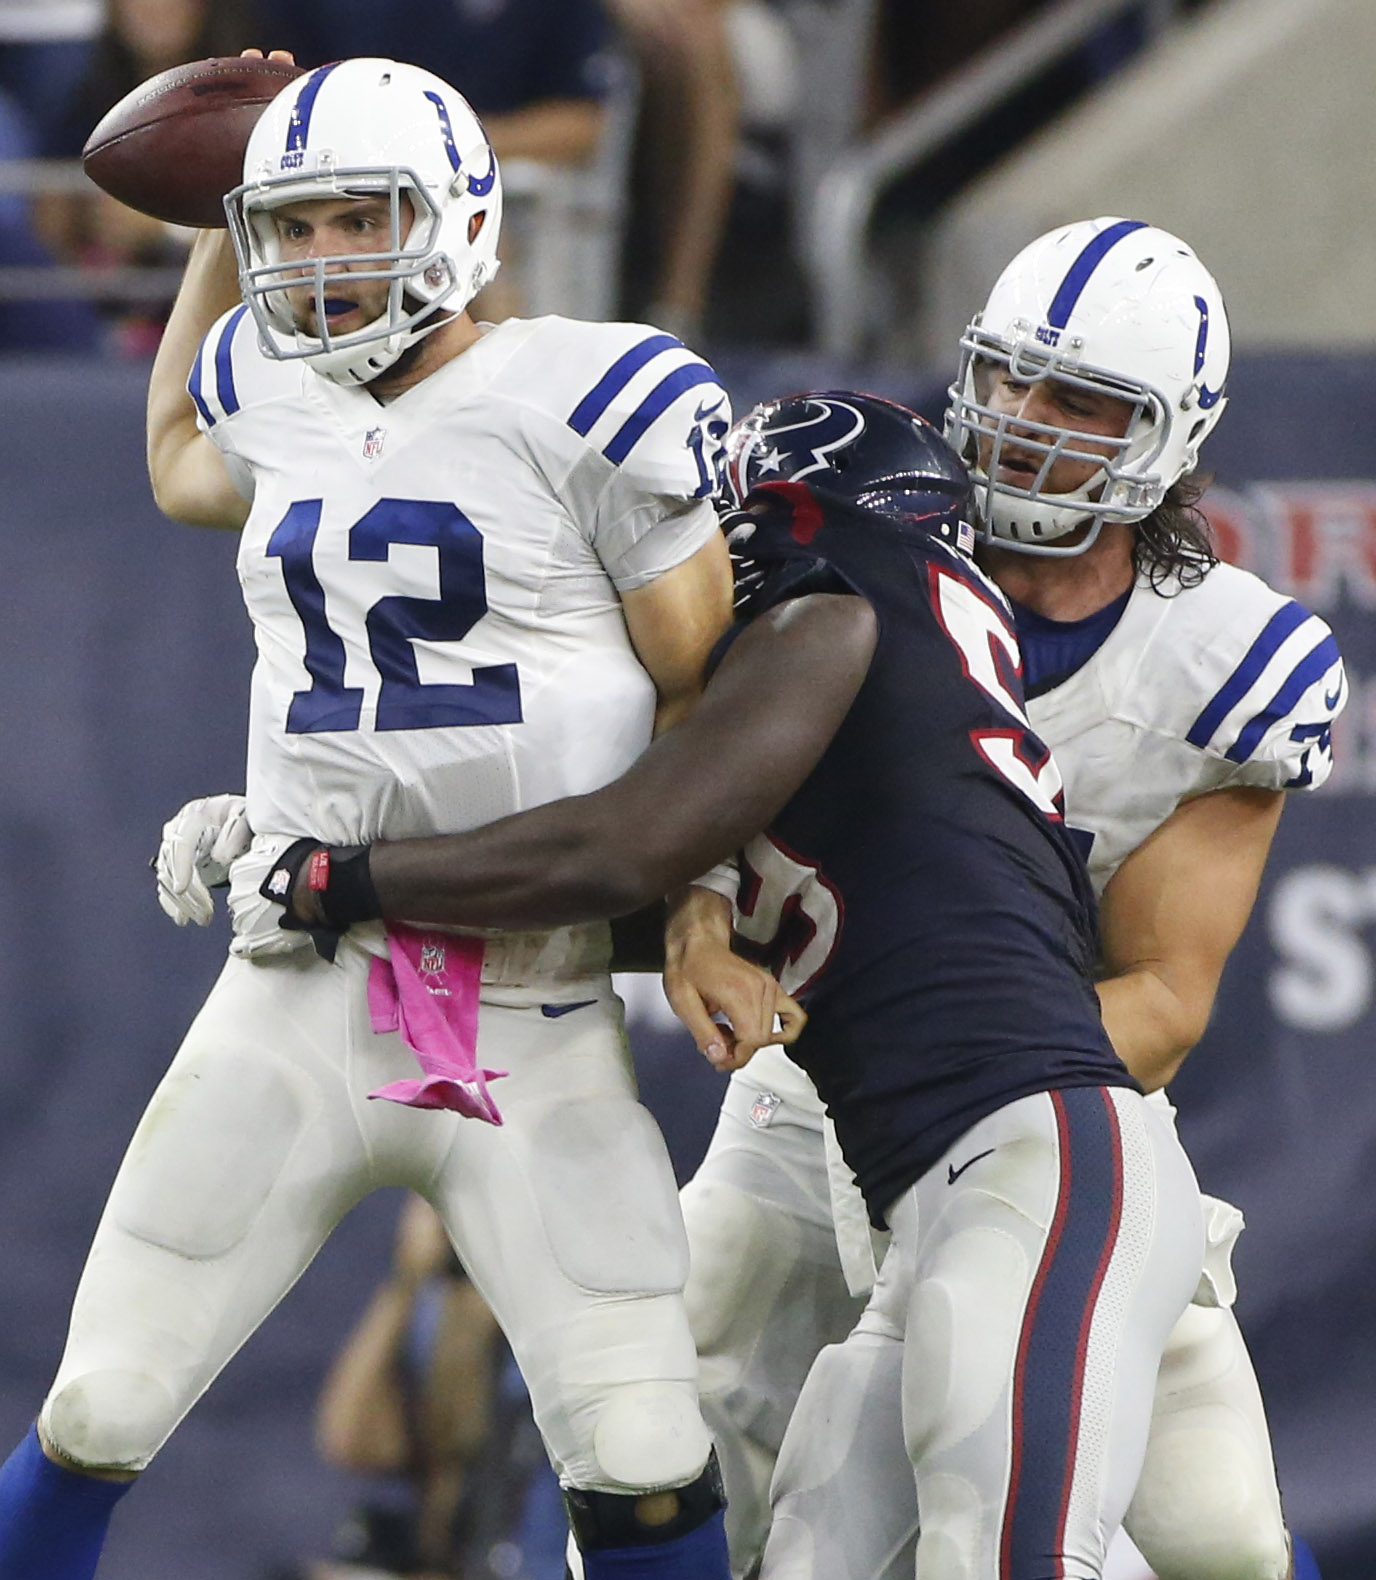 Andrew Luck takes a licking, keeps on ticking